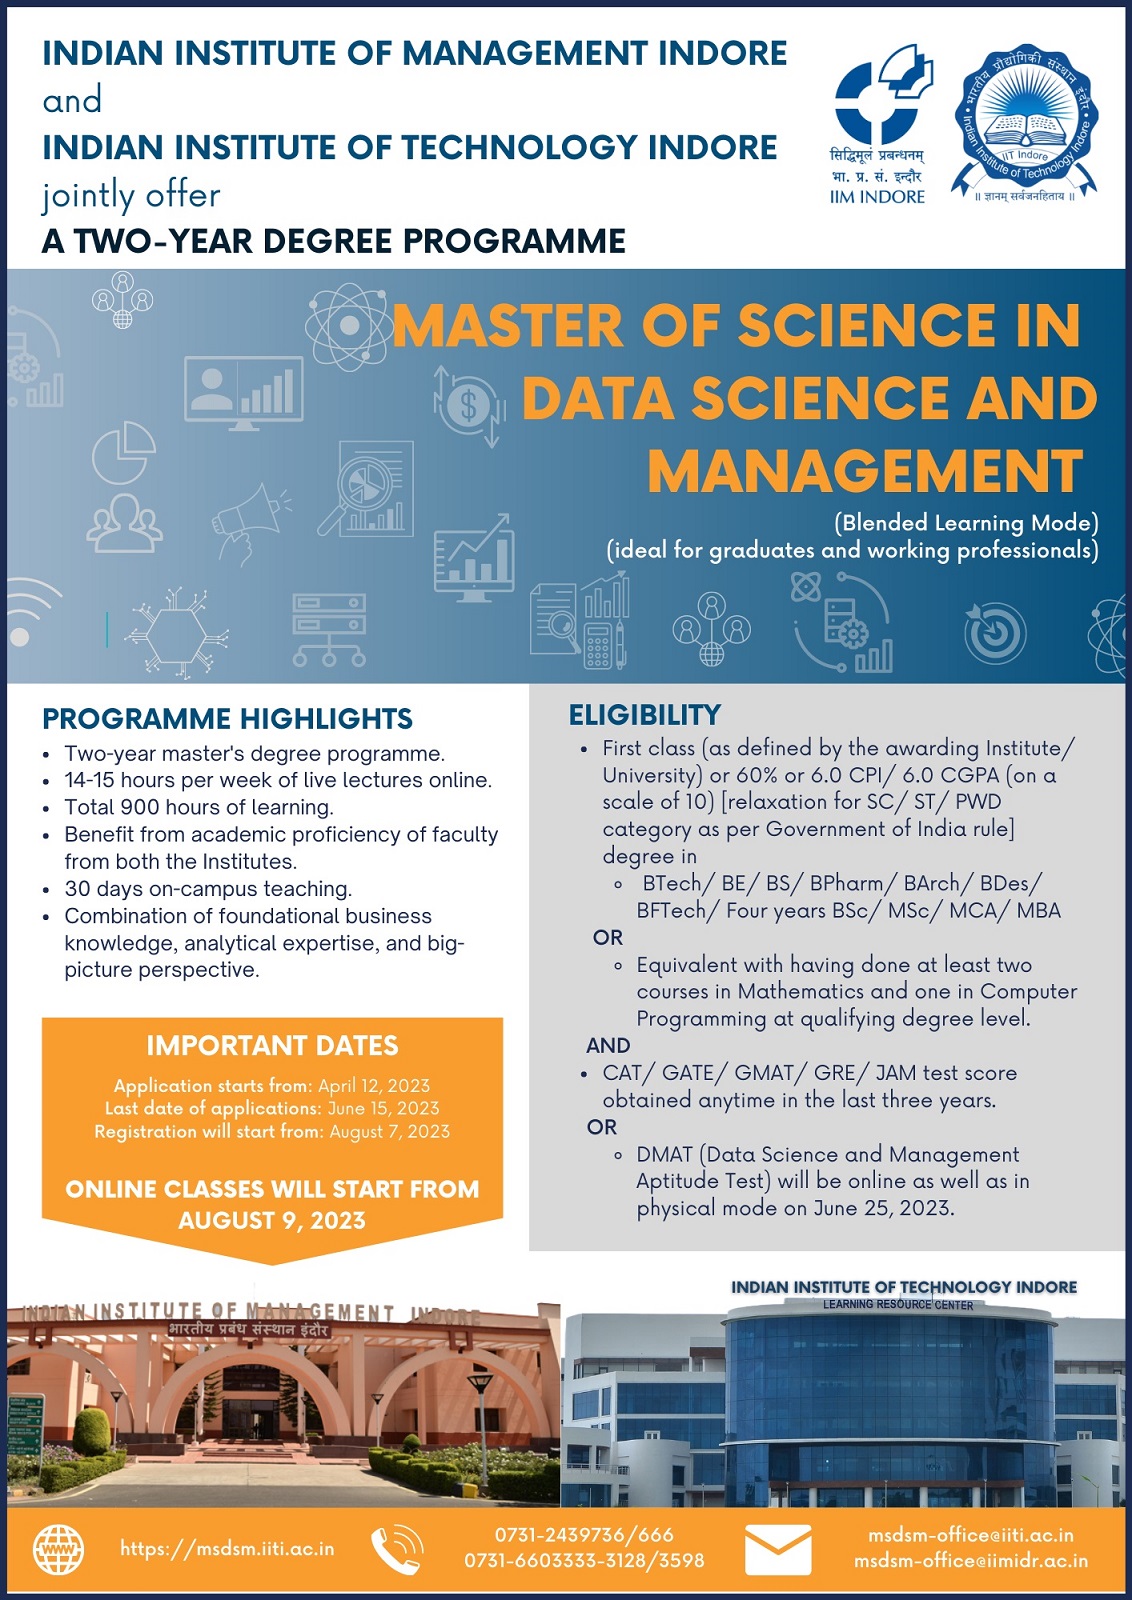 IIT Kanpur Data Science  IIT Kanpur Data Science/Data Analytics master  Degree Course Without GATE 